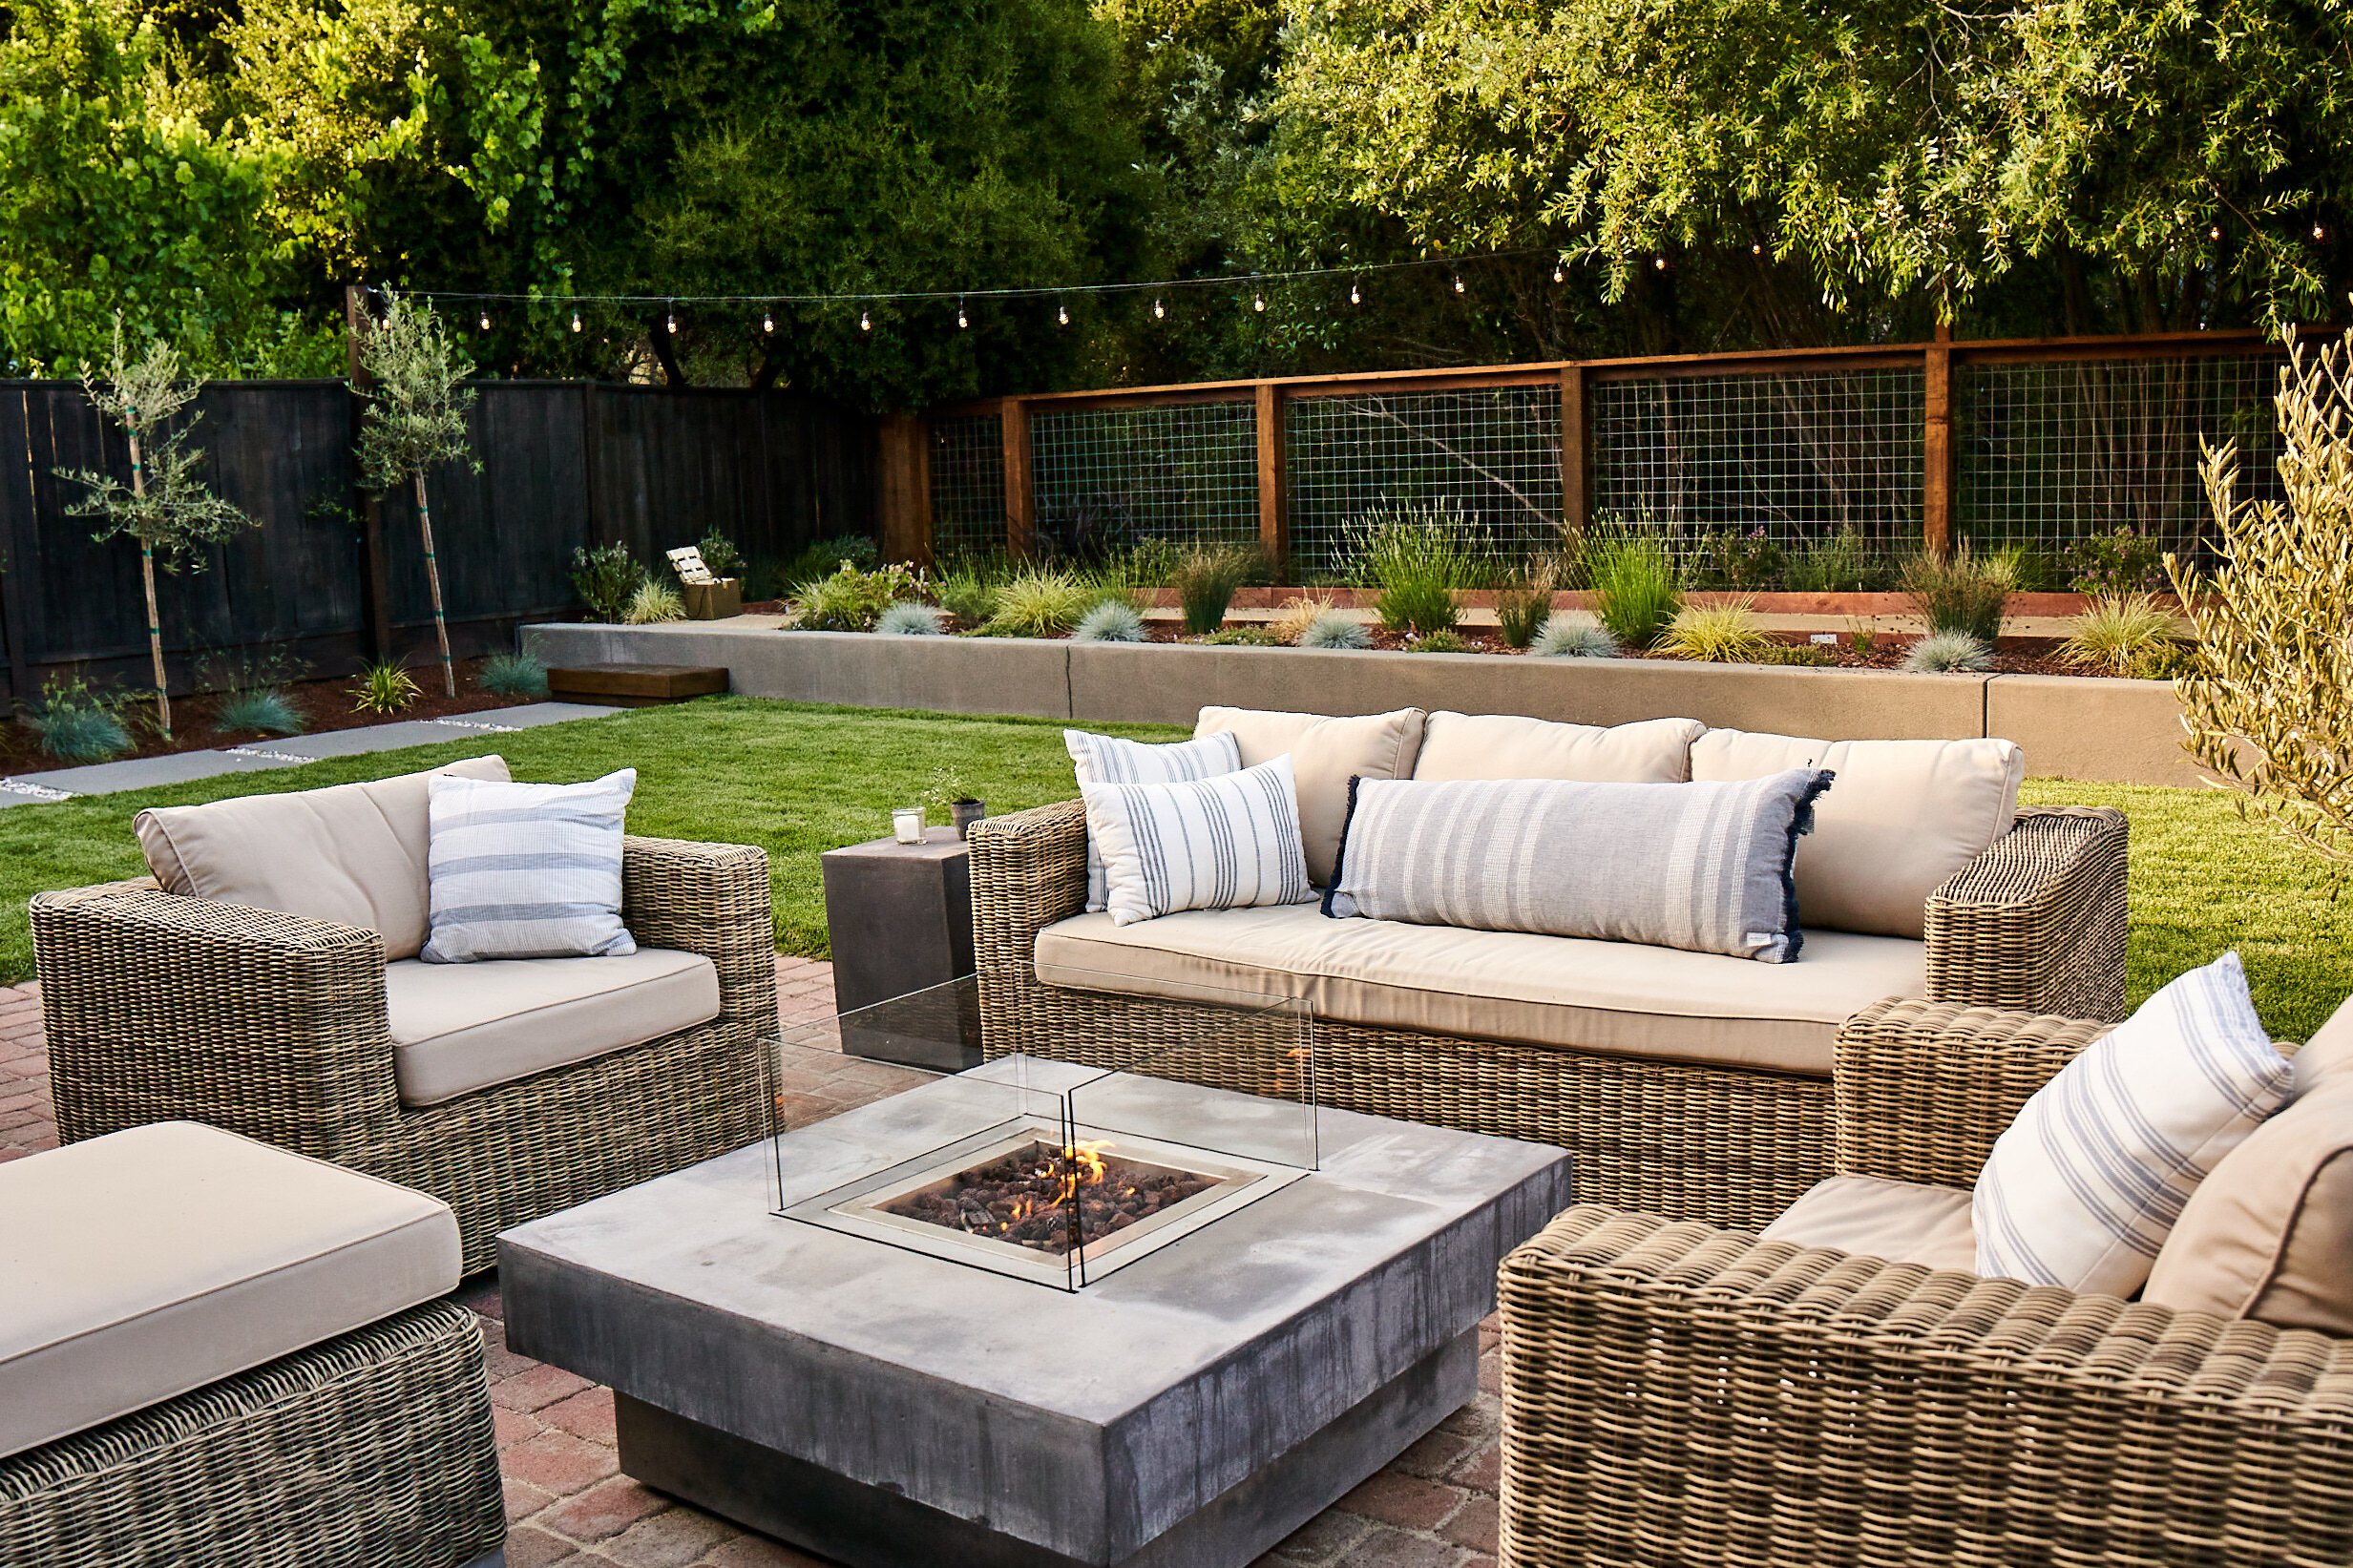 Wicker outdoor seating set on a brick patio surrounding a modern square fire pit with lawn and planting beds behind